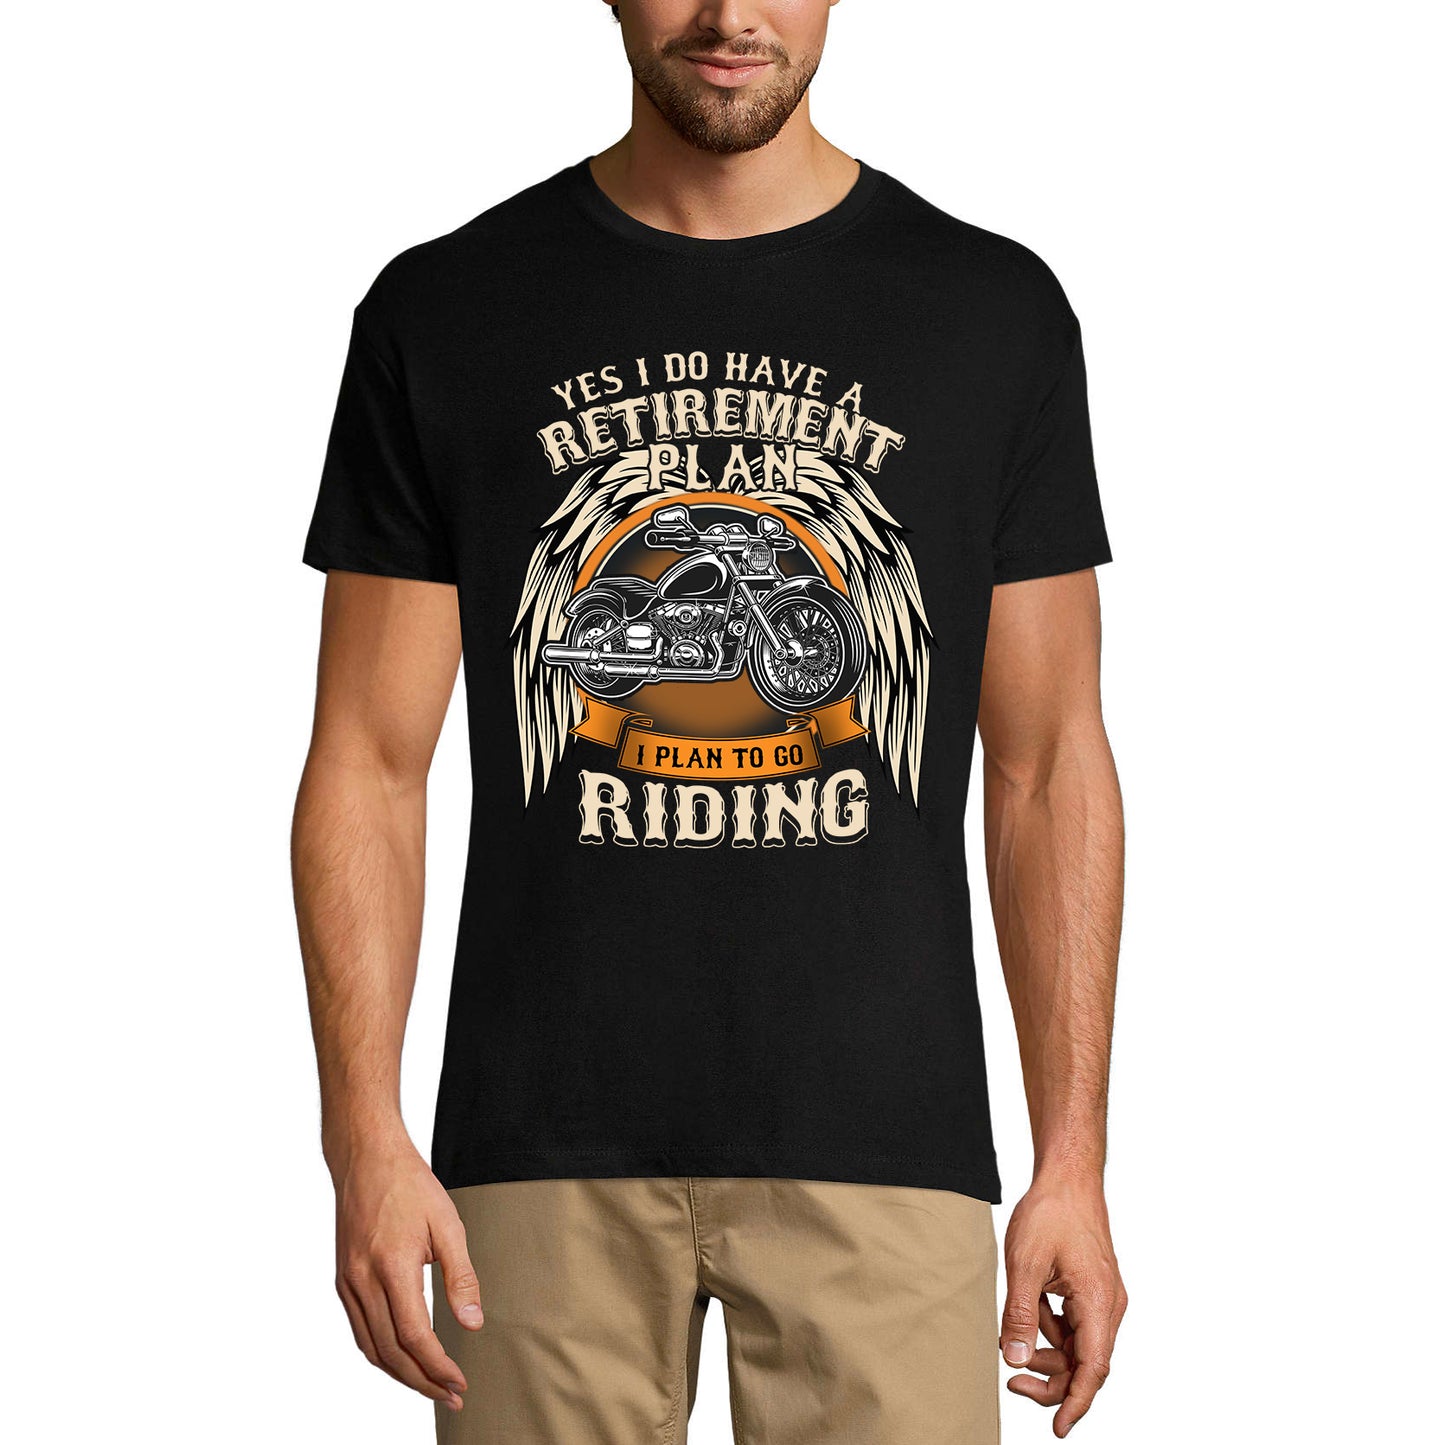 ULTRABASIC Men's Graphic T-Shirt Yes I Do Have a Retirement Plan I Plan To Go Riding - Biker Tee Shirt